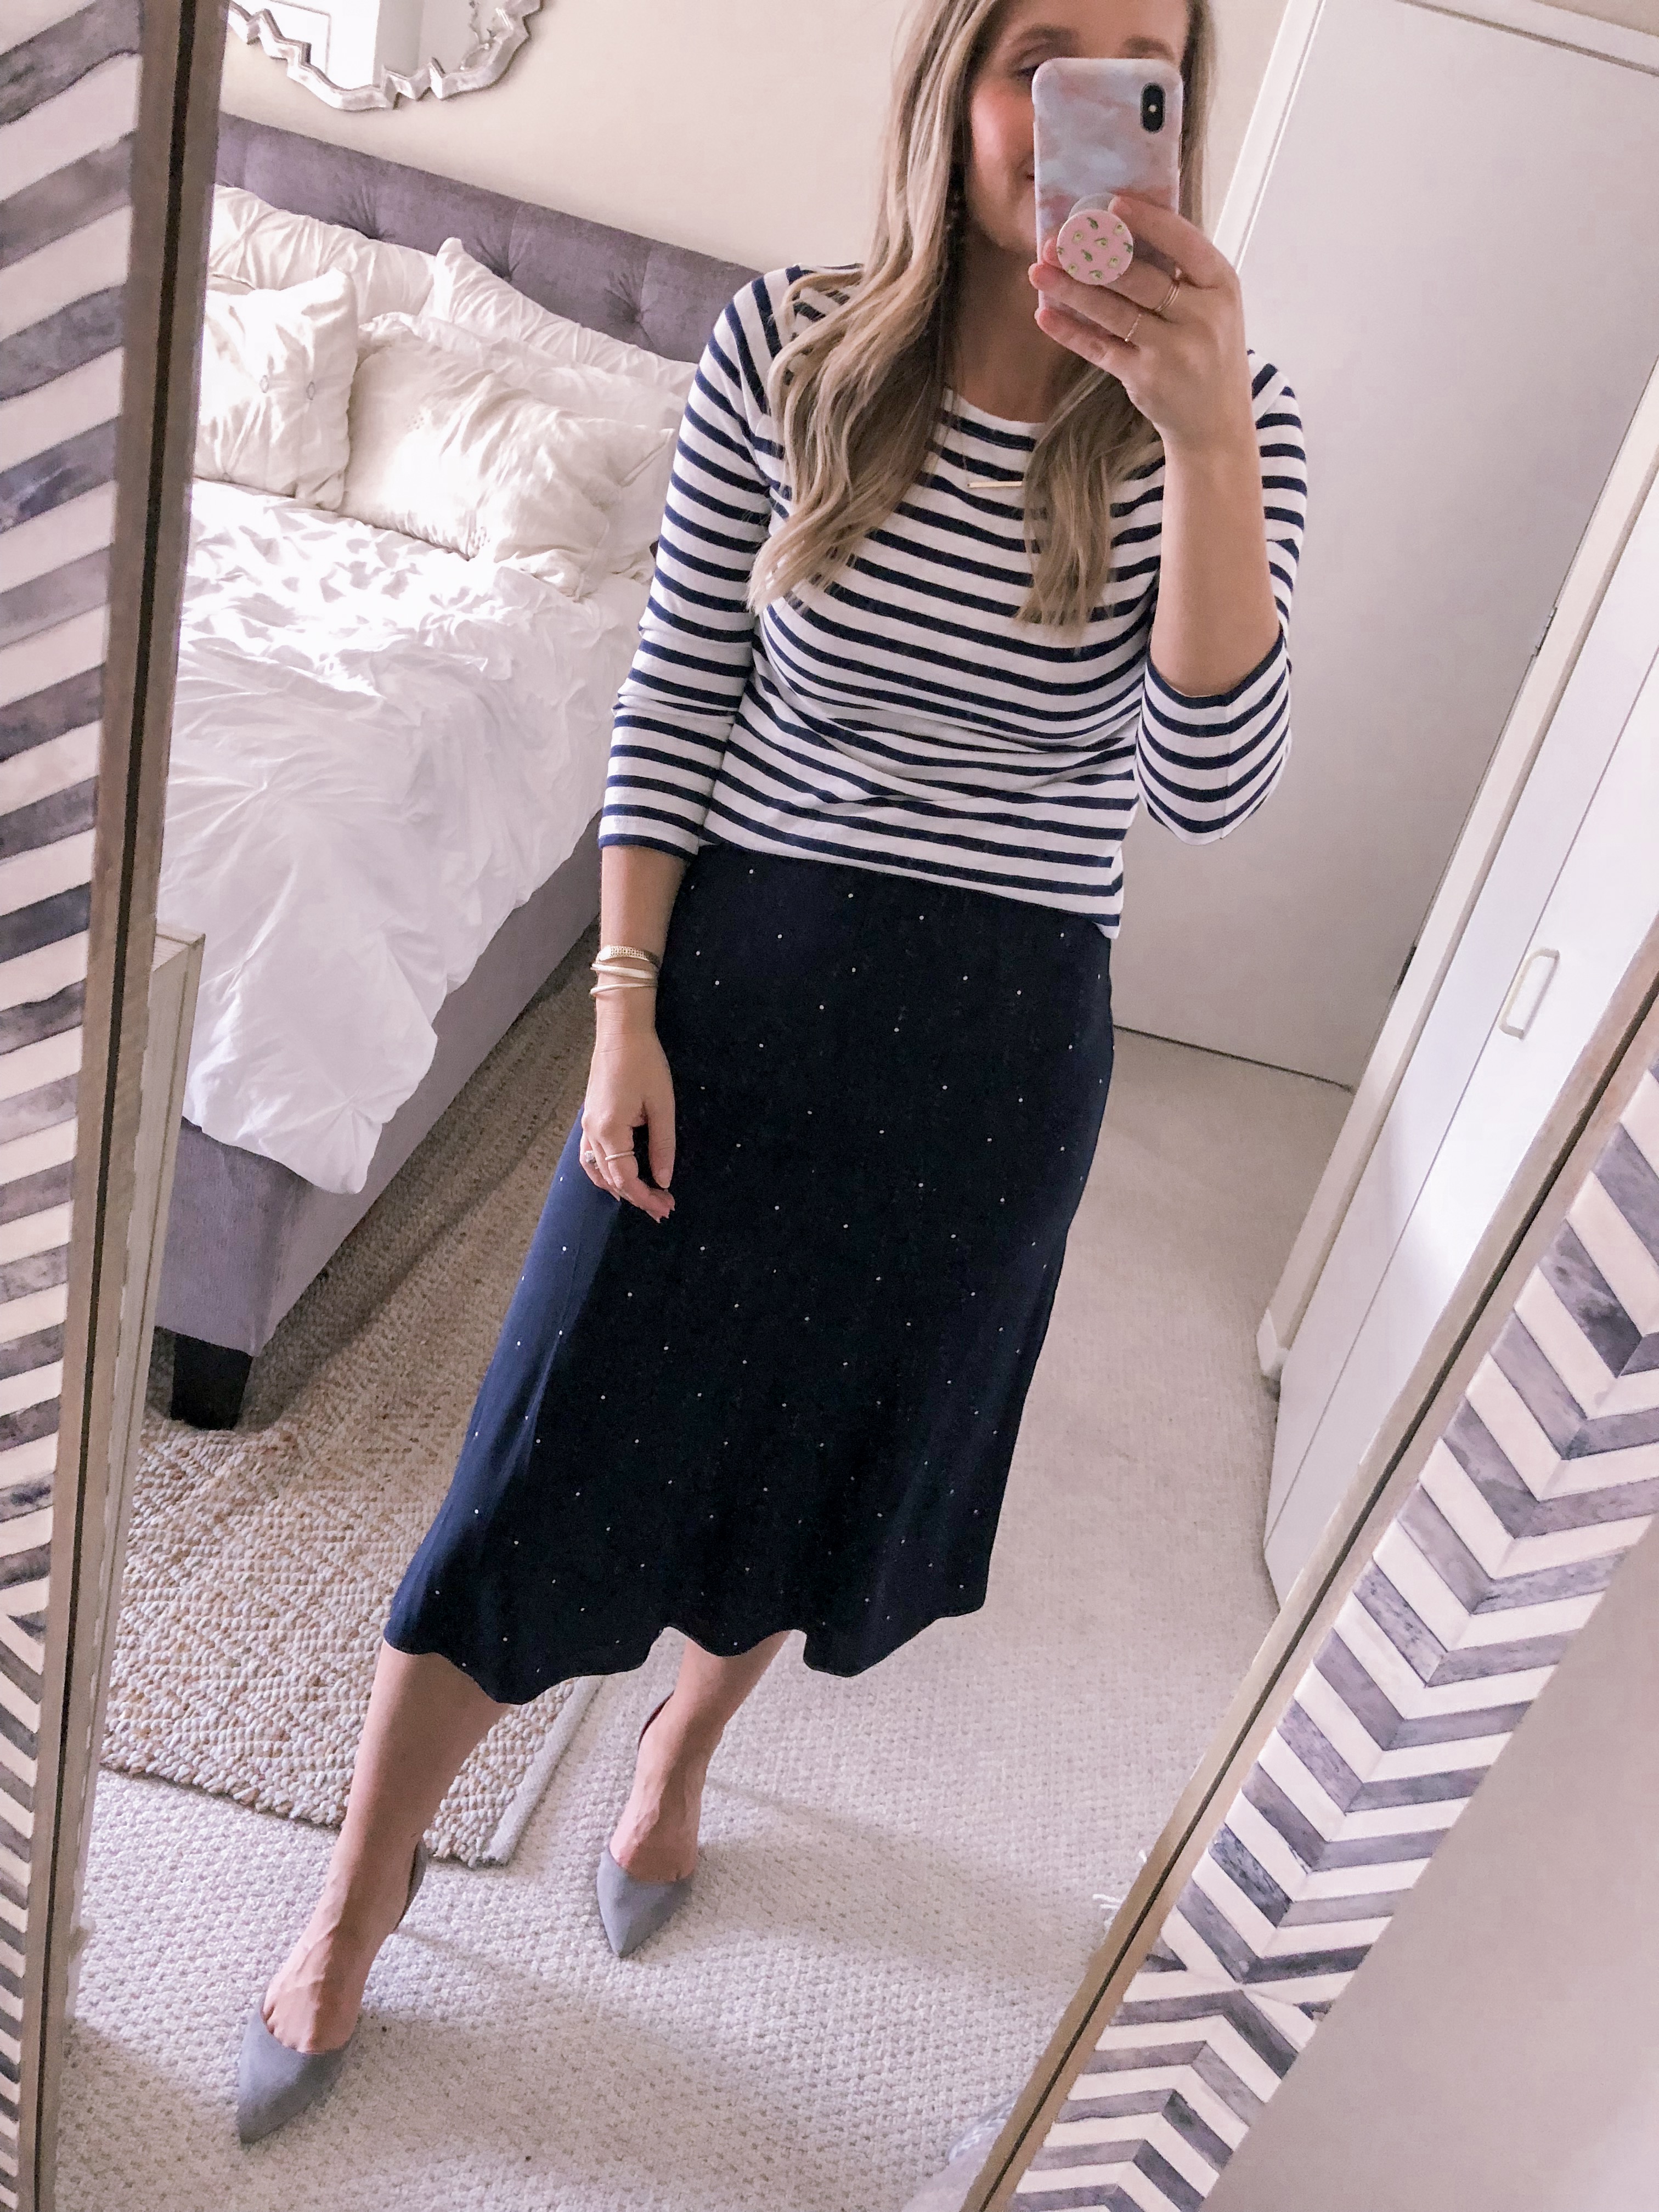 Nacy stripe J.crew top with a Vince Camuto polka dot skirt in navy for an office outfit idea.